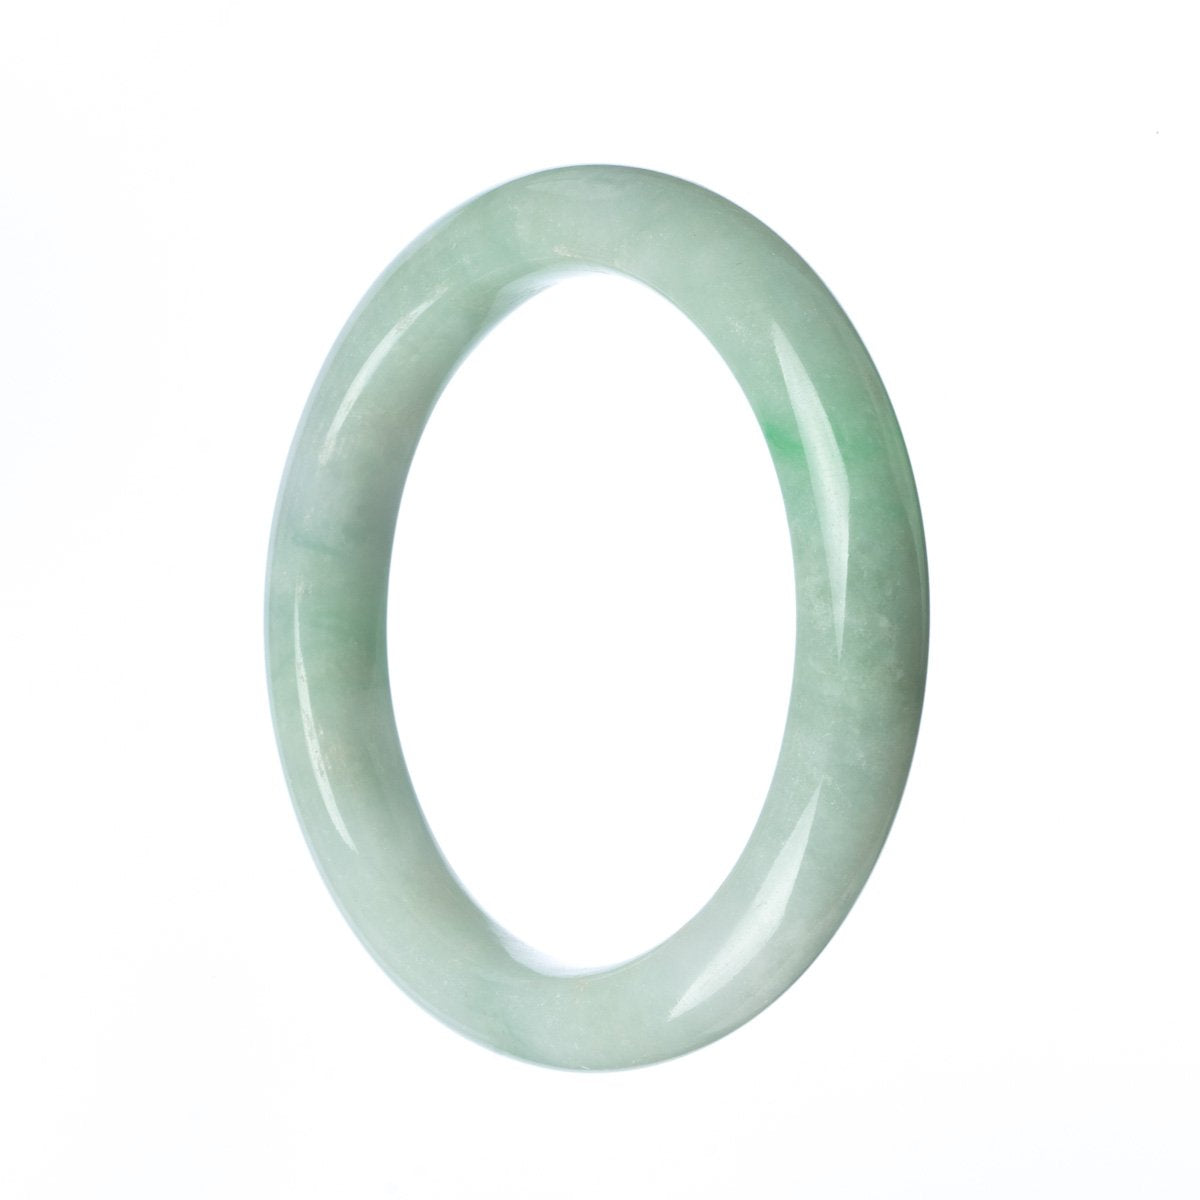 A close-up photo of a green traditional jade bracelet with a semi-round shape, measuring 63mm in diameter. The bracelet is made of genuine Grade A jade and is sold by MAYS GEMS.